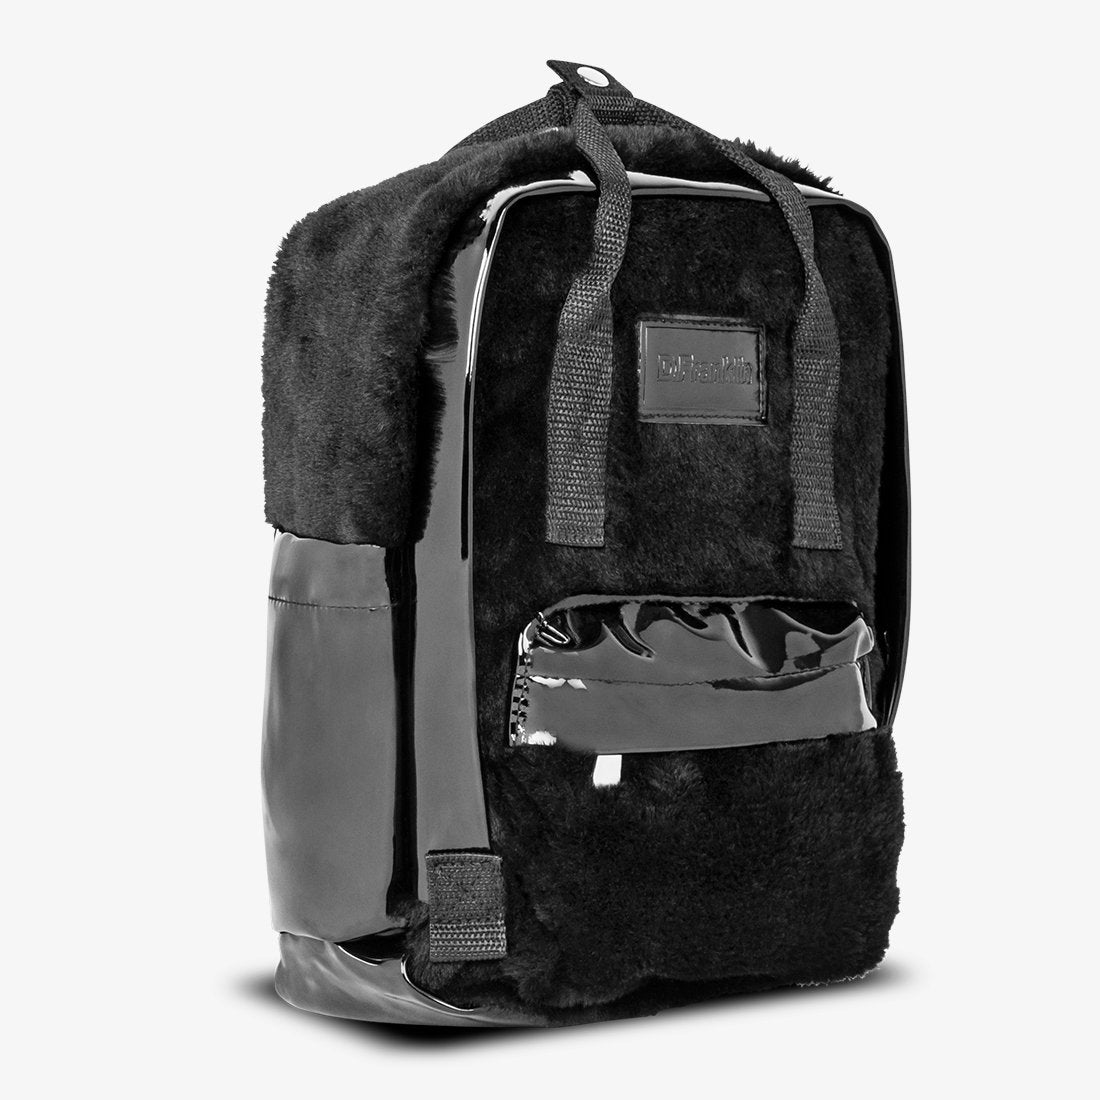 Abby Backpack Patent / Fur Black